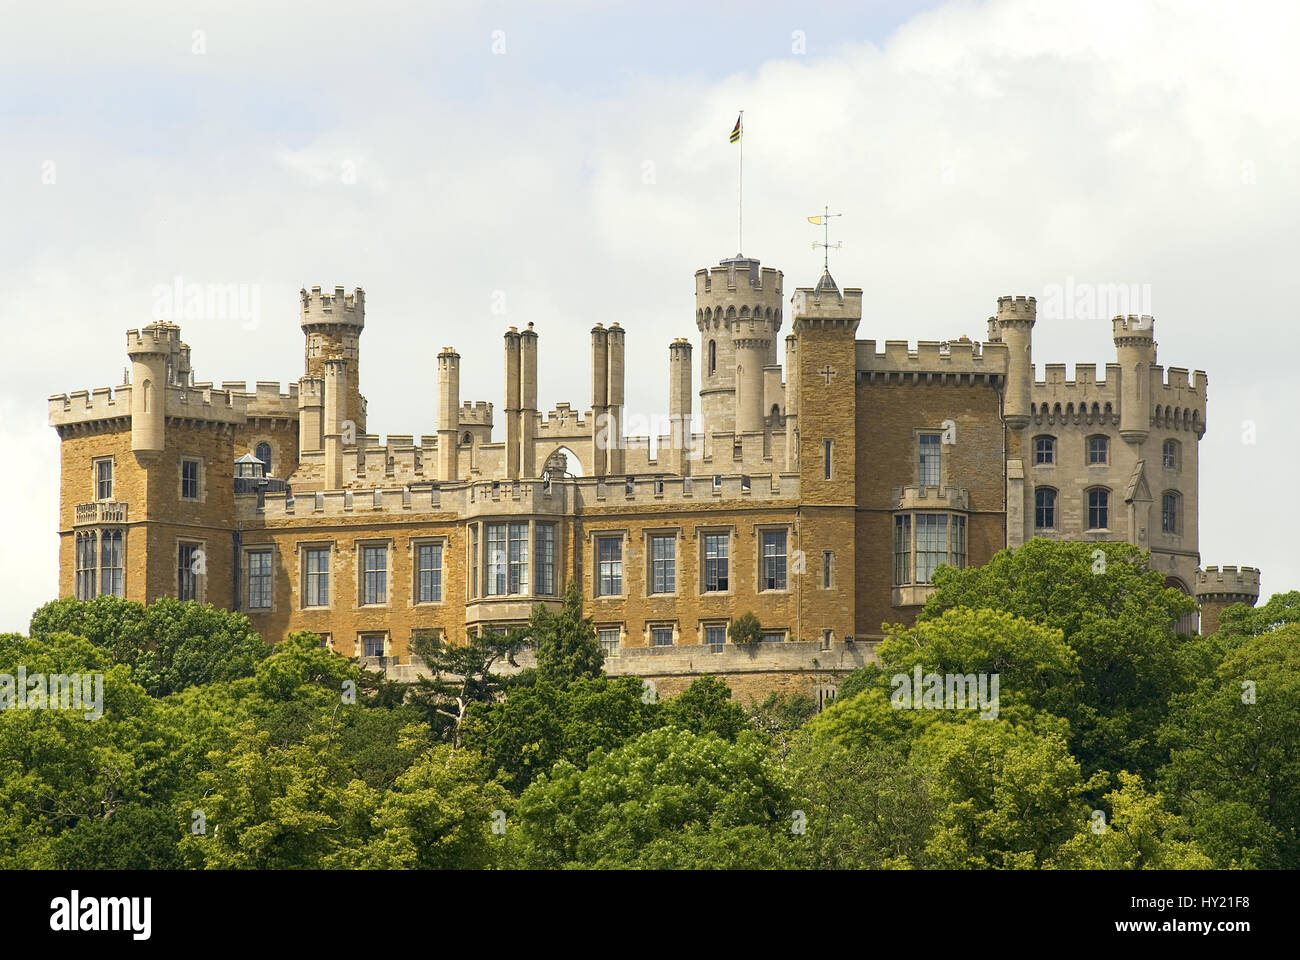 Belvoir Castle is a stately home in the English county of Leicestershire, overlooking the Vale of Belvoir.   Blick auf die Burg Belvoir in Leicestersh Stock Photo